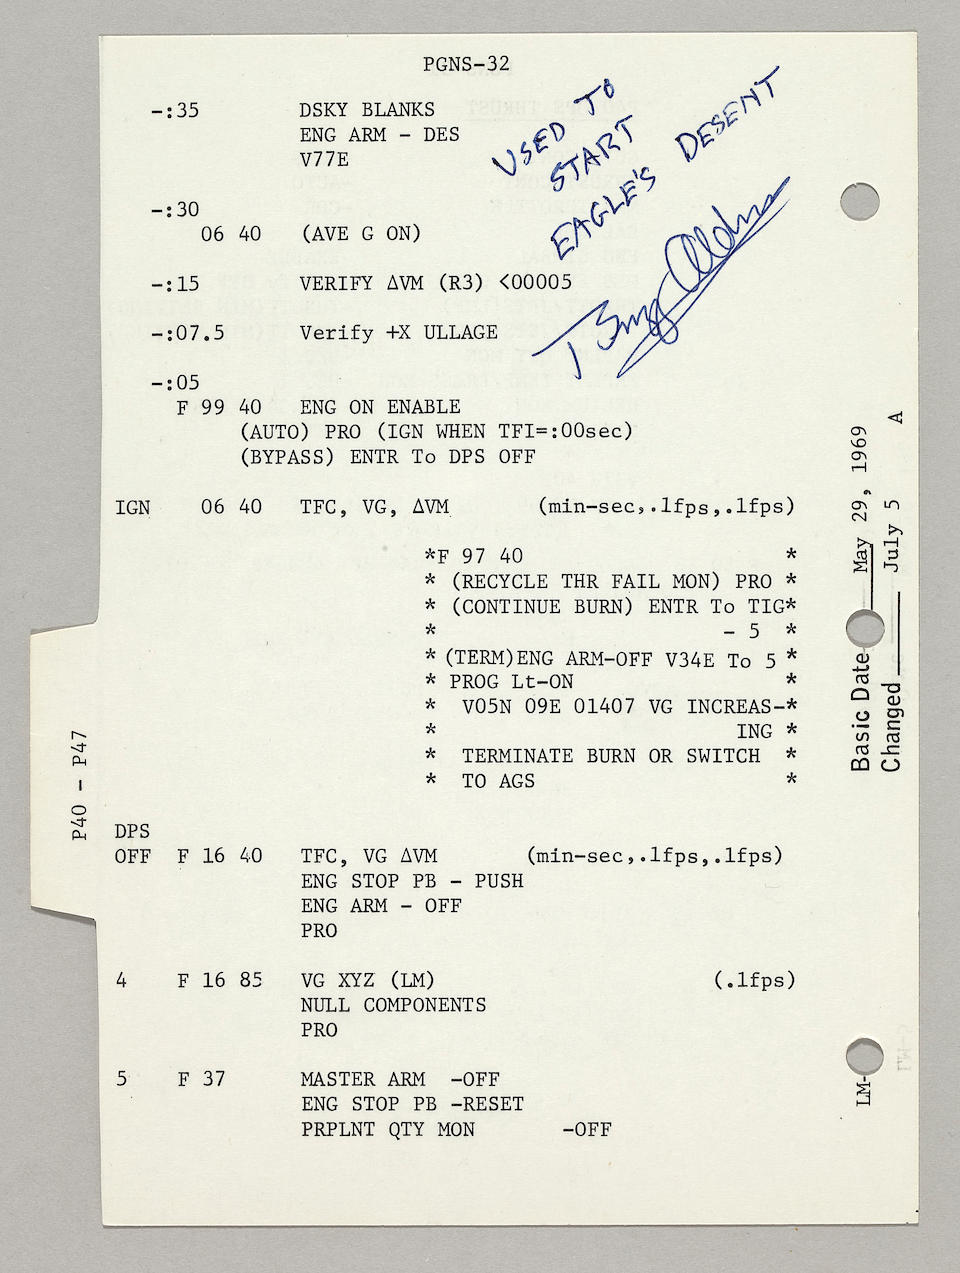 FLOWN APOLLO 11 LM G & N DICTIONARY SHEET&#8212;THE STEPS ENABLING THE START OF EAGLE'S ENGINE TO BEGIN THE LANDING.